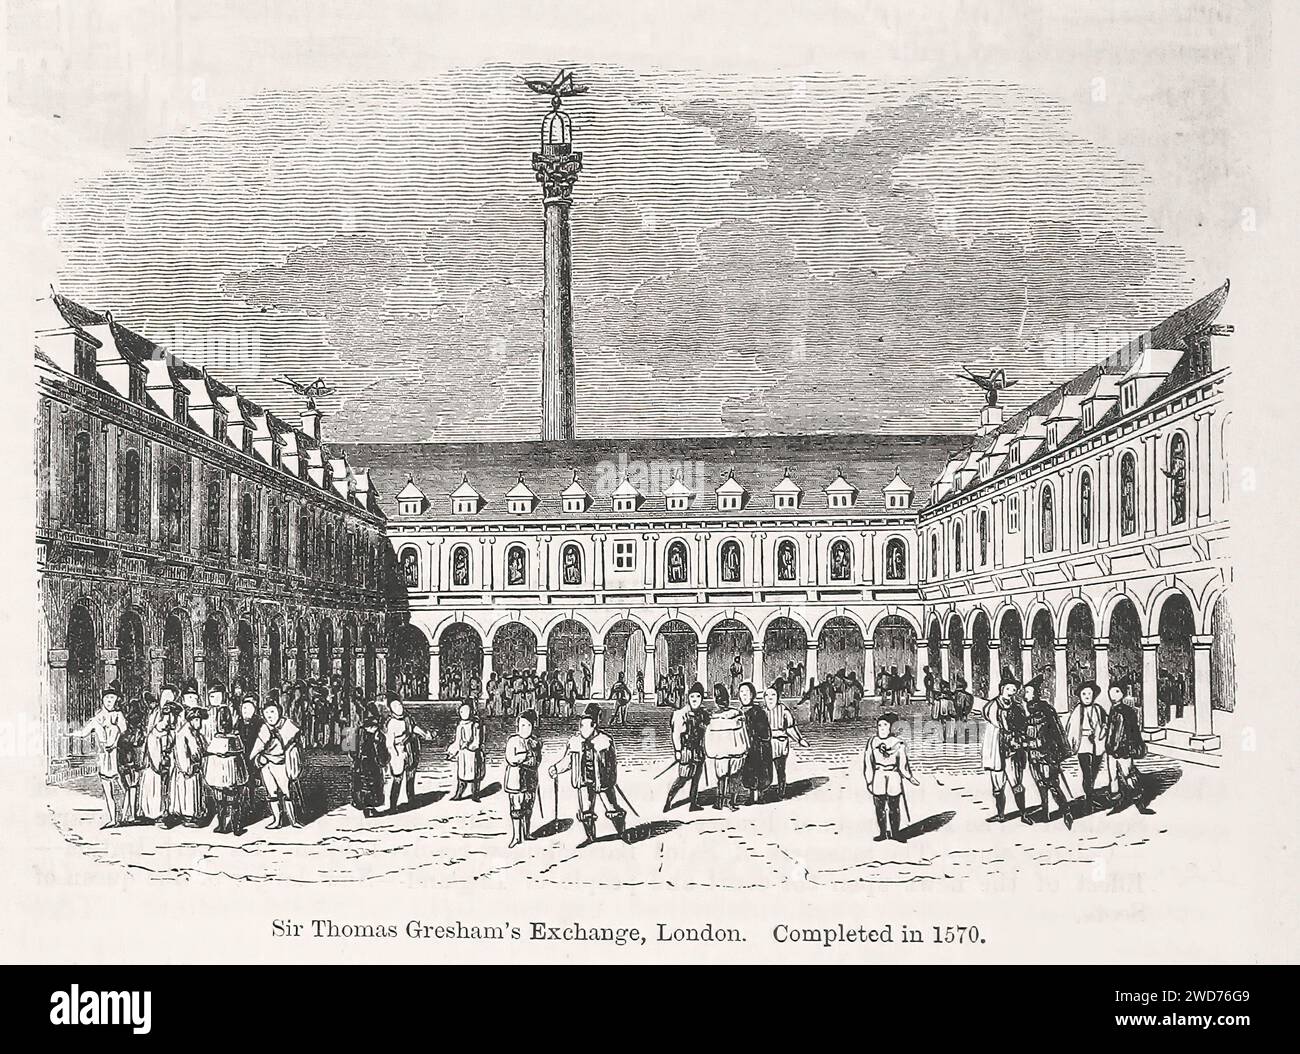 SIR THOMAS GRESHAM’S EXCHANGE, LONDON. COMPLETED IN 1570.  - Image taken from 'The Popular History Of England: An Illustrated History Of Society And Government From The Earliest Period To Our OwnTimes By Charles KNIGHT - London. Bradbury and Evans. 1856-1862 Stock Photo